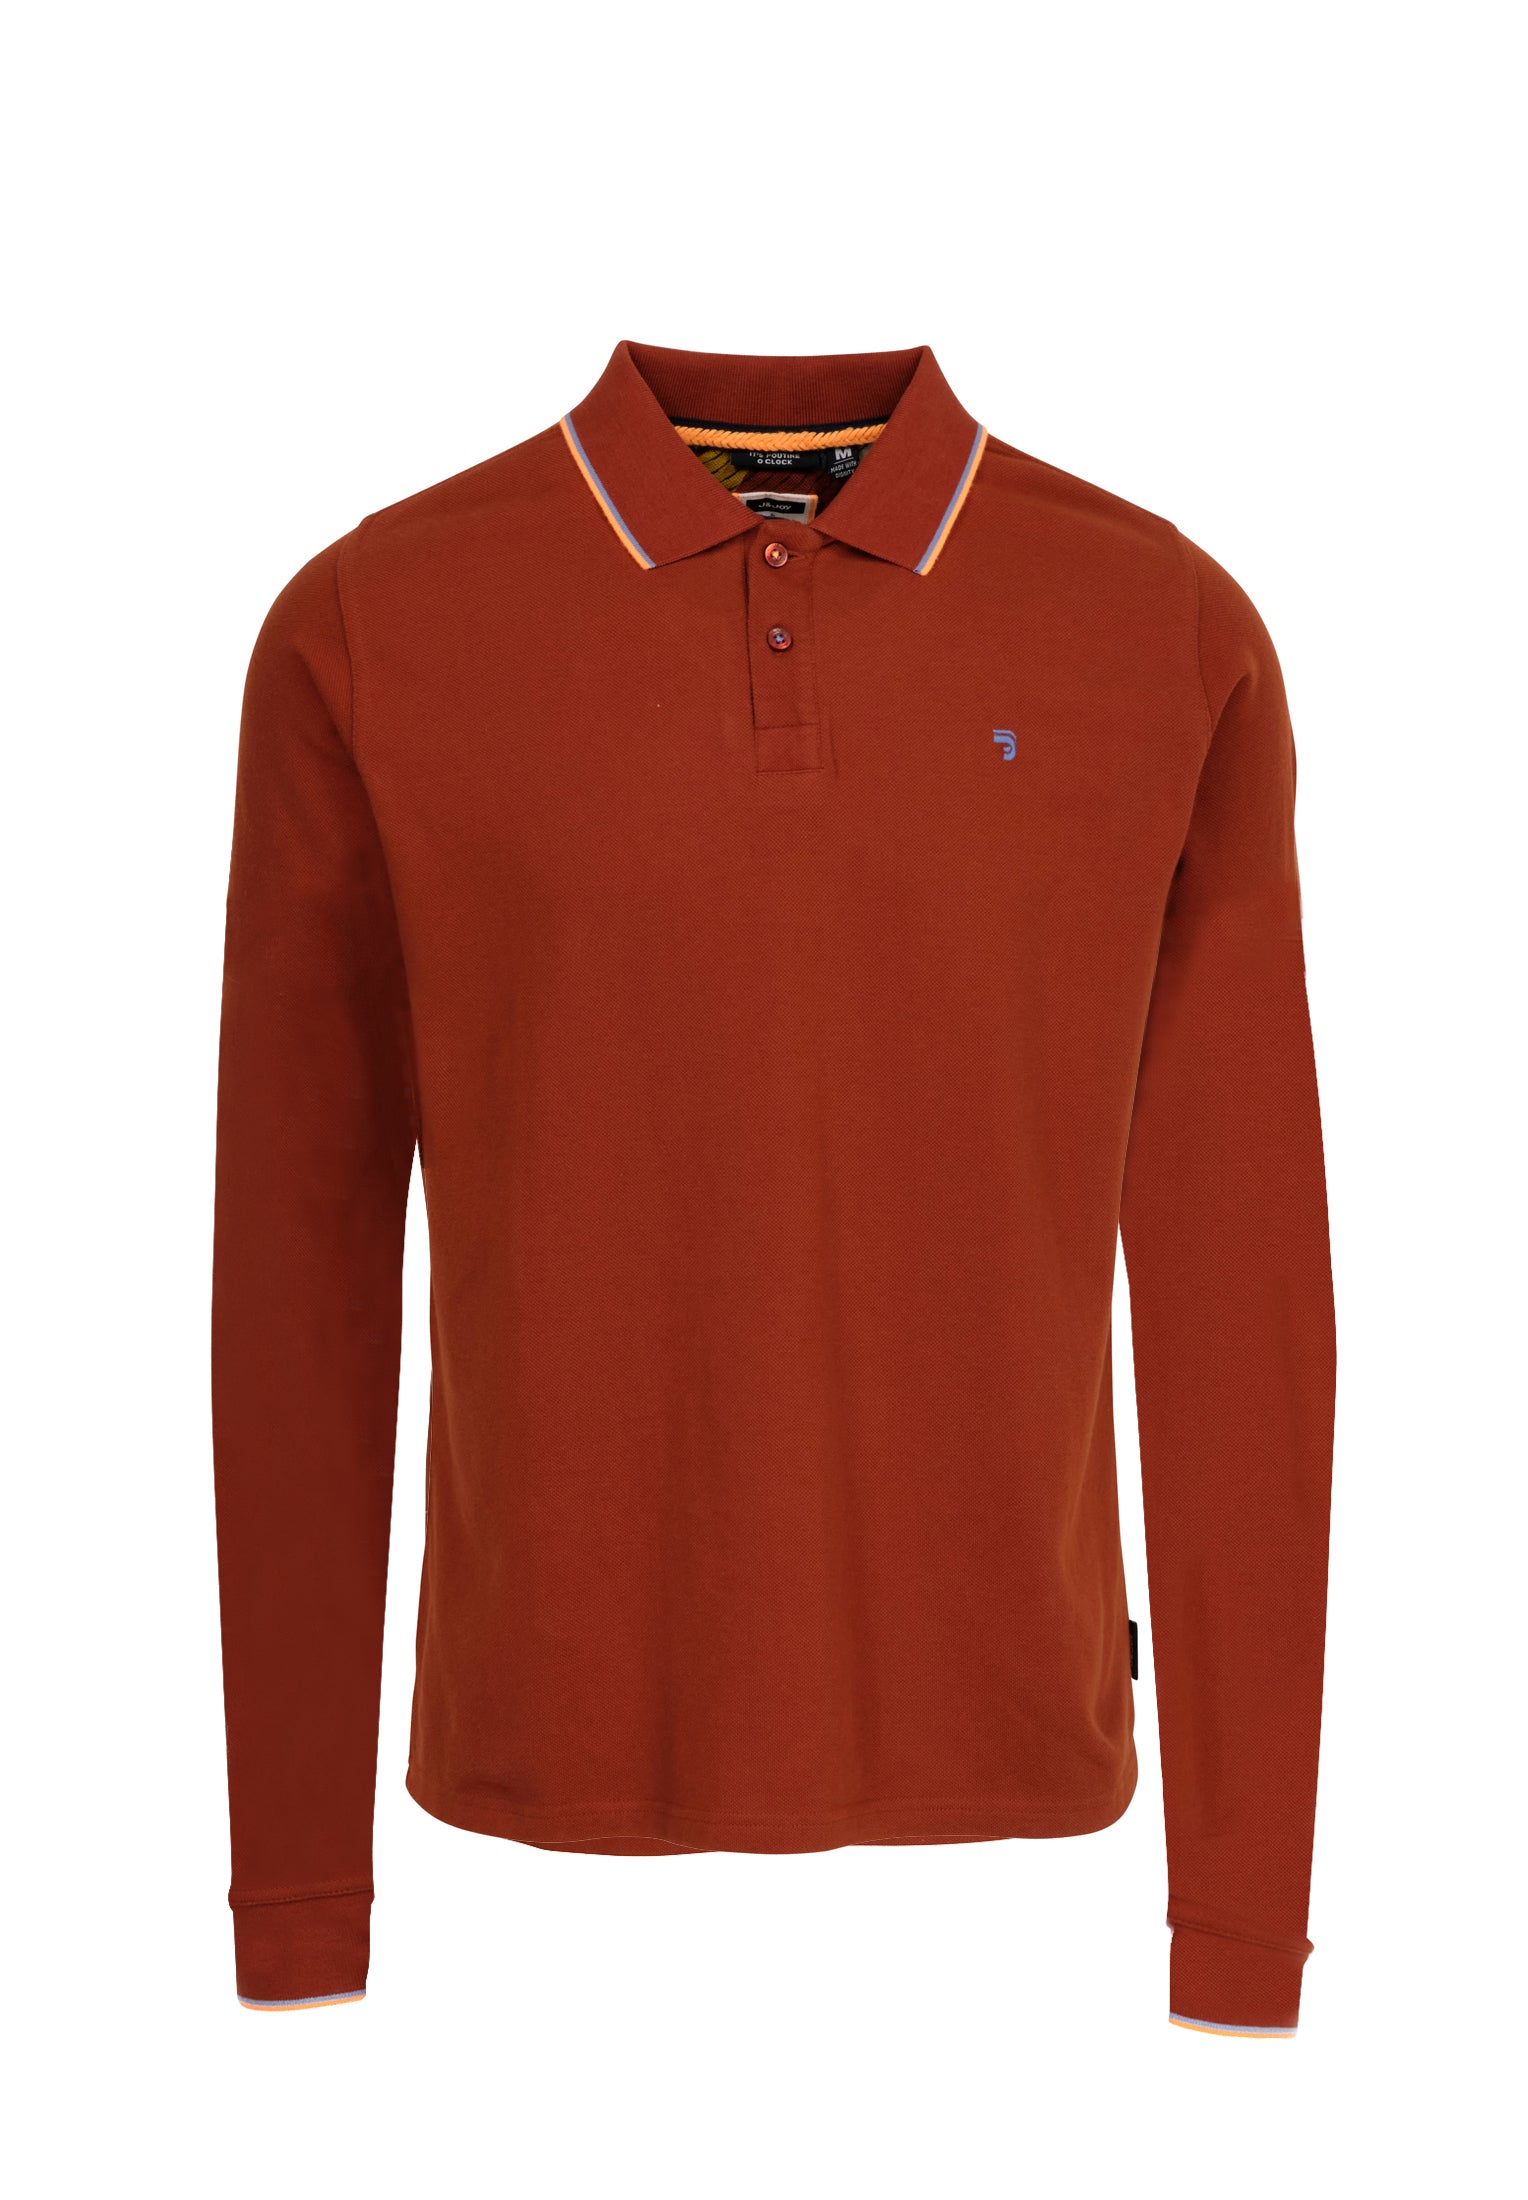 Polo Longues Manches Homme 09 Ontario Forest Brown | J&JOY.